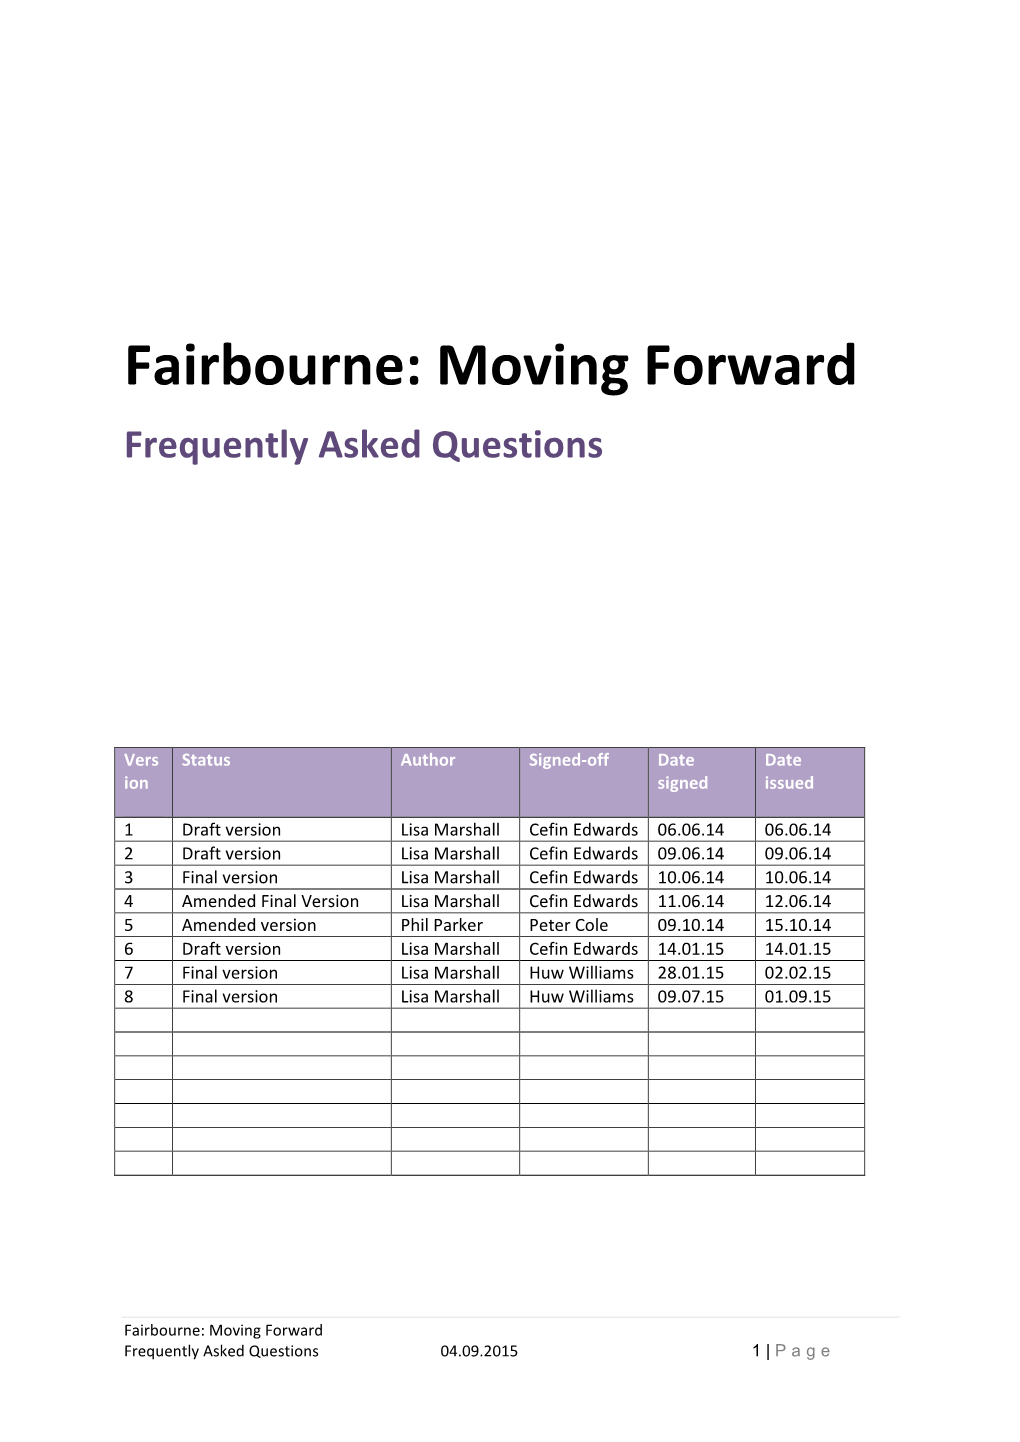 Fairbourne Moving Forward: Frequently Asked